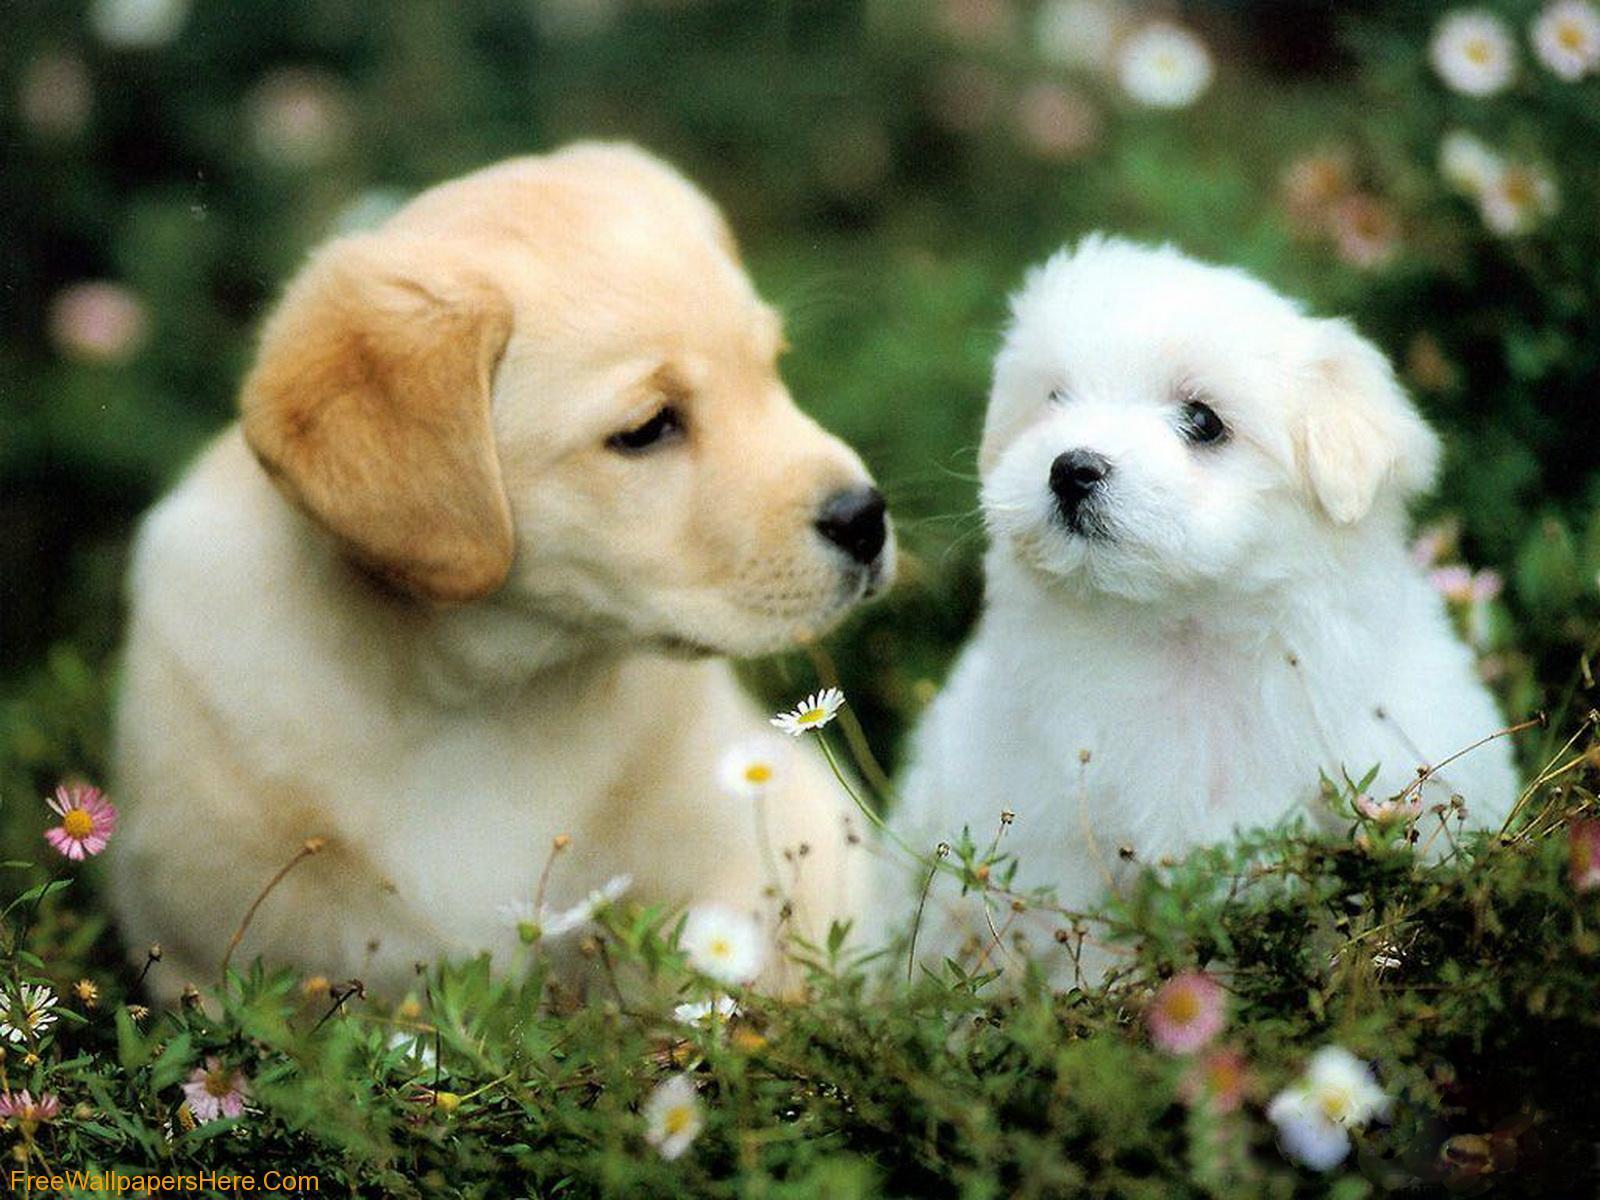 Wallpaper For > Cute Puppies Wallpaper For Mobile